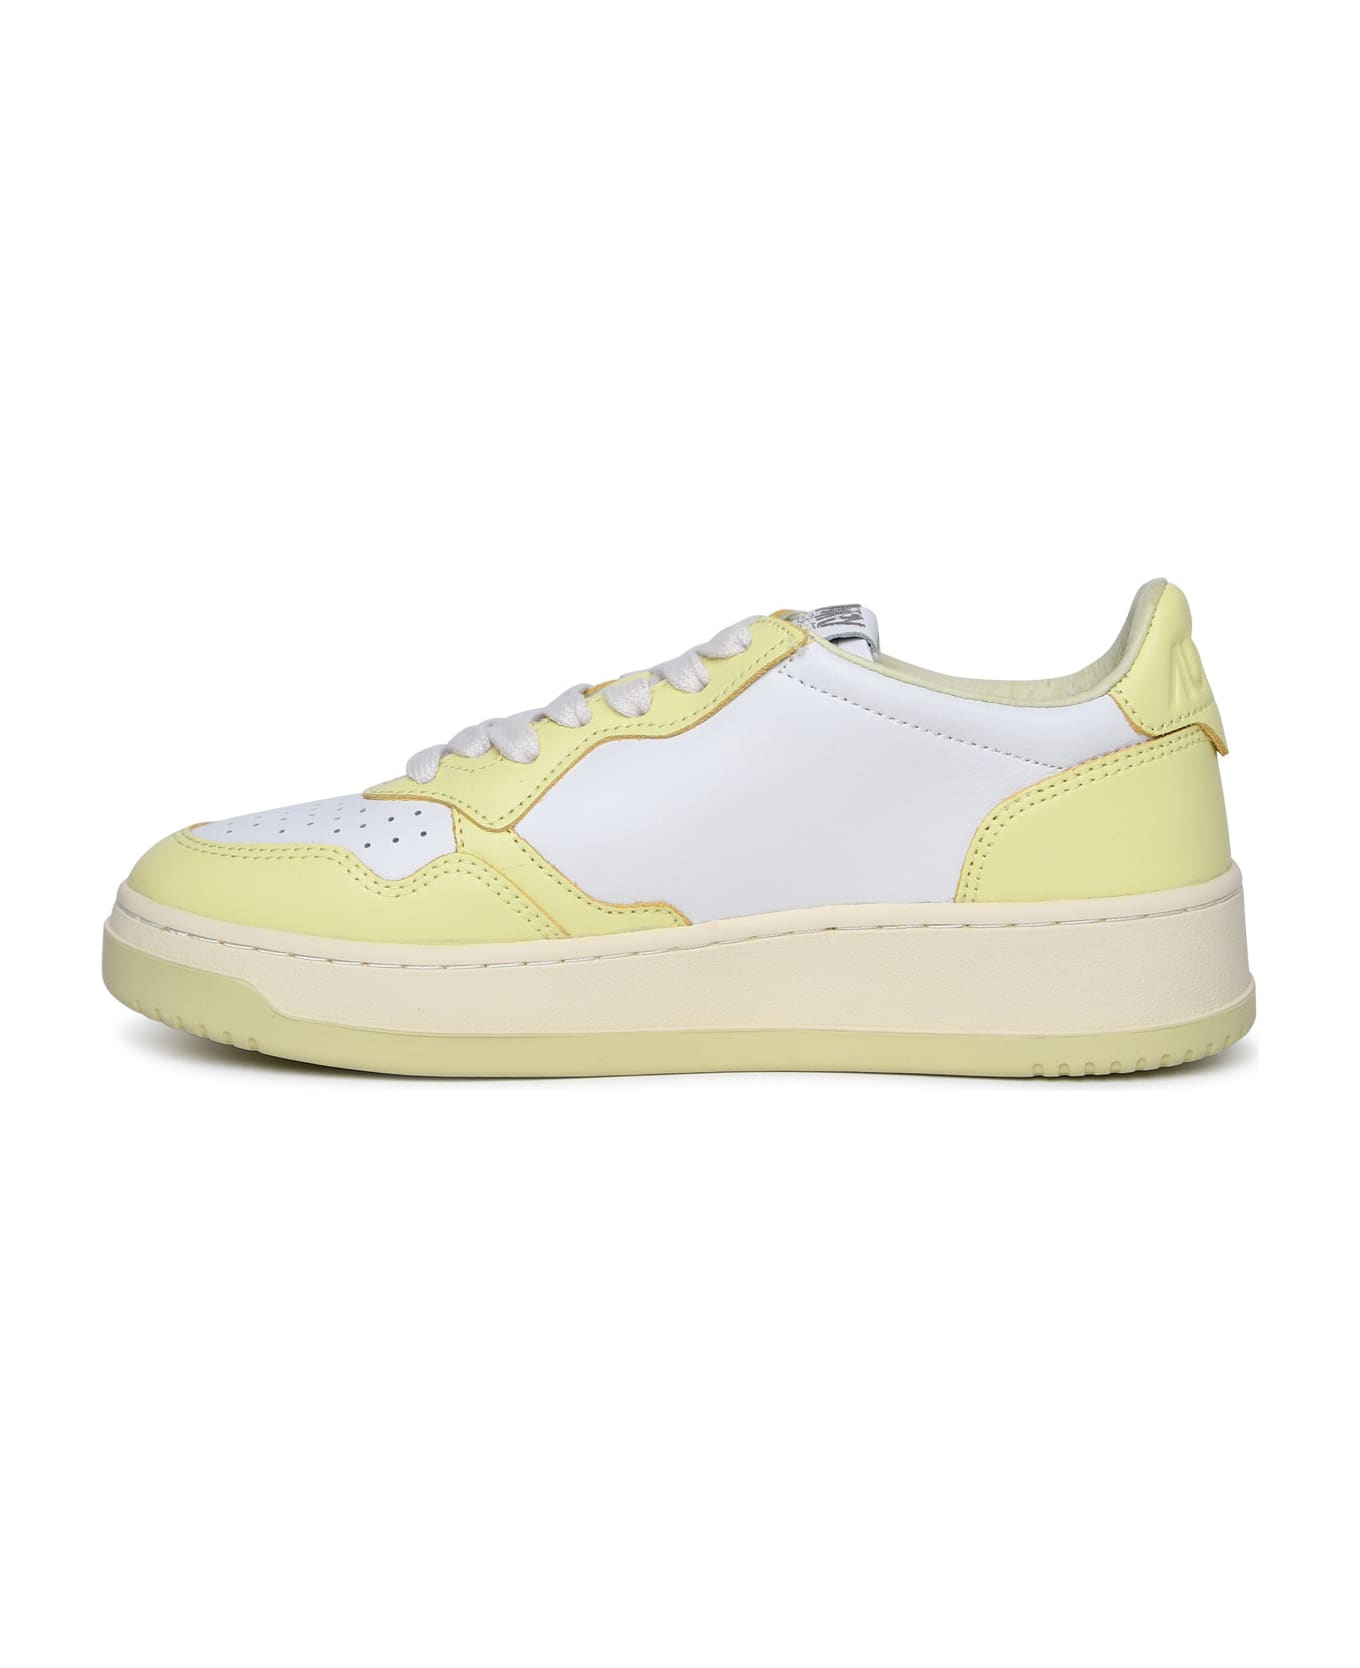 Autry 'medalist' Yellow Leather Sneakers - Wht/lime Yl